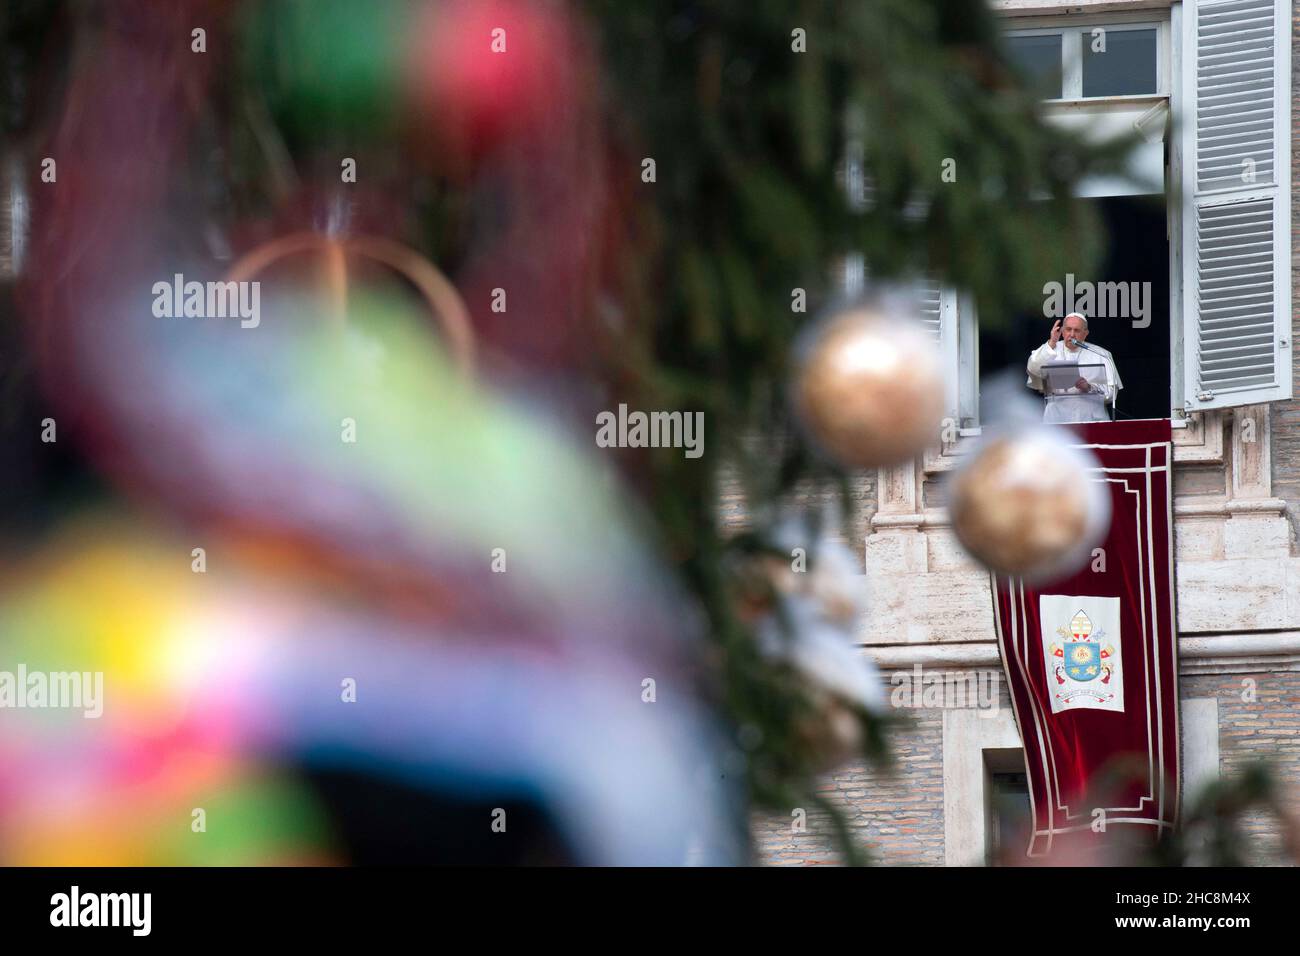 Vatican City, Vatican. 26th Dec, 2021. Pope Francis Angelus apostolic palace in Vatican, 26 December 2021. RESTRICTED TO EDITORIAL USE - Vatican Media/Spaziani. Credit: dpa/Alamy Live News Stock Photo